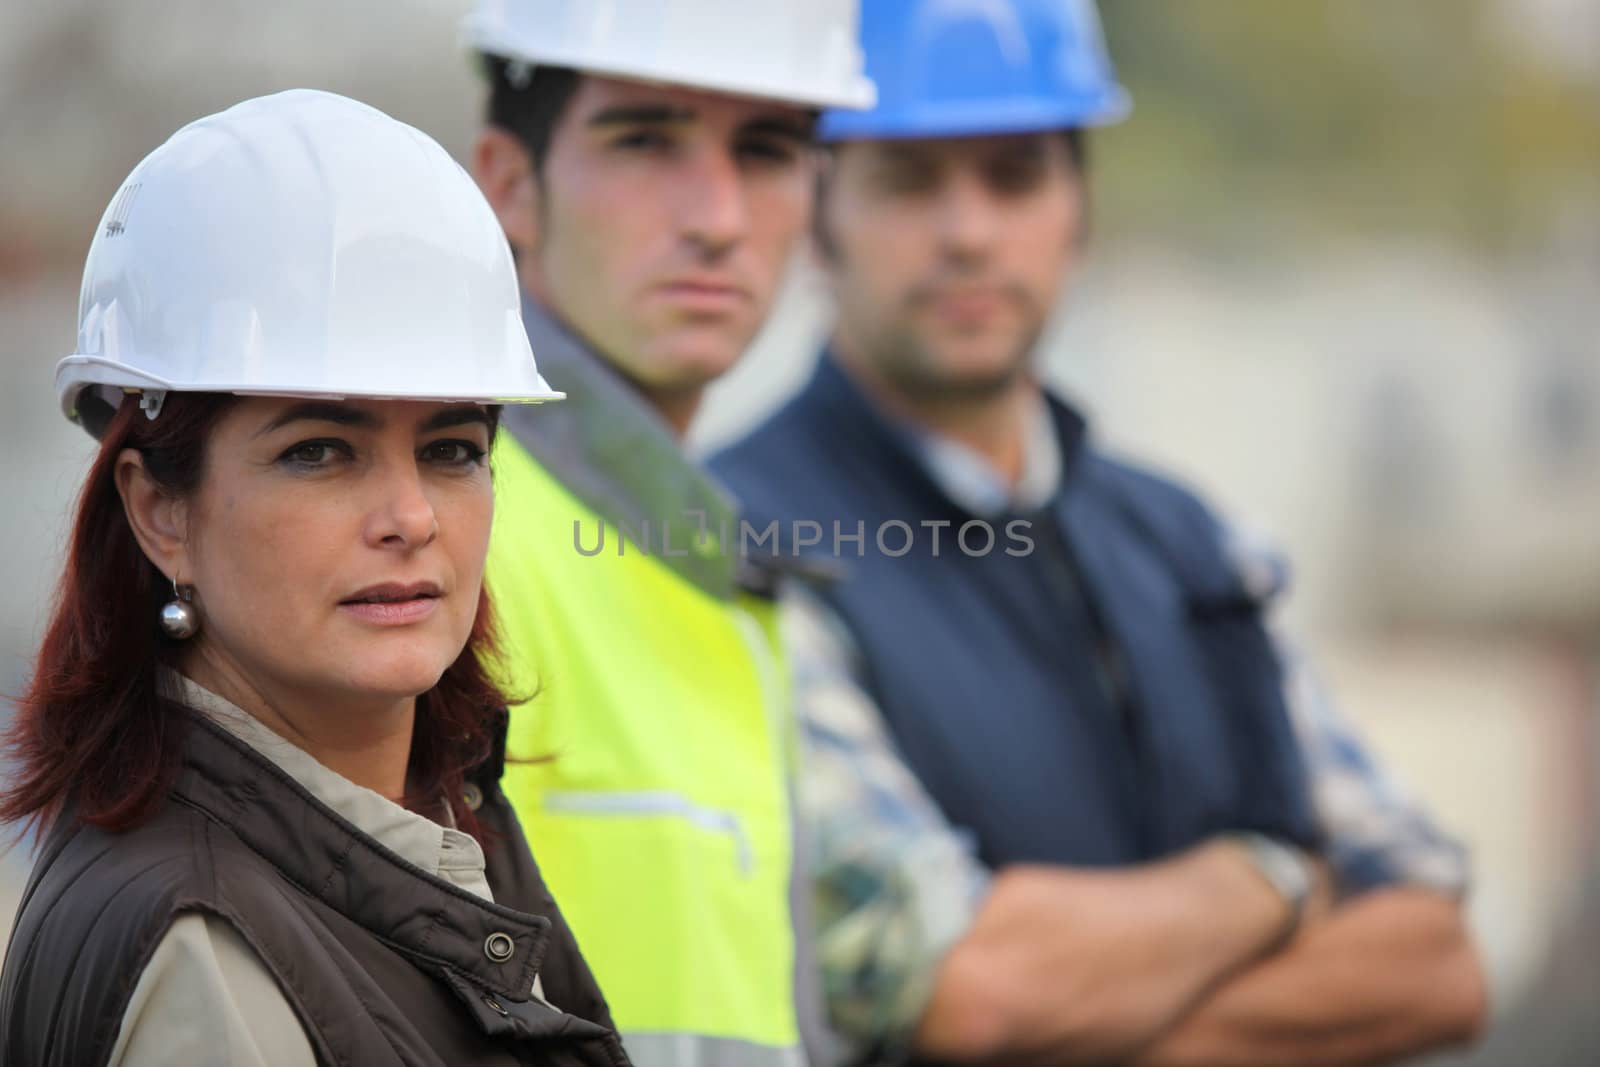 Three construction colleagues